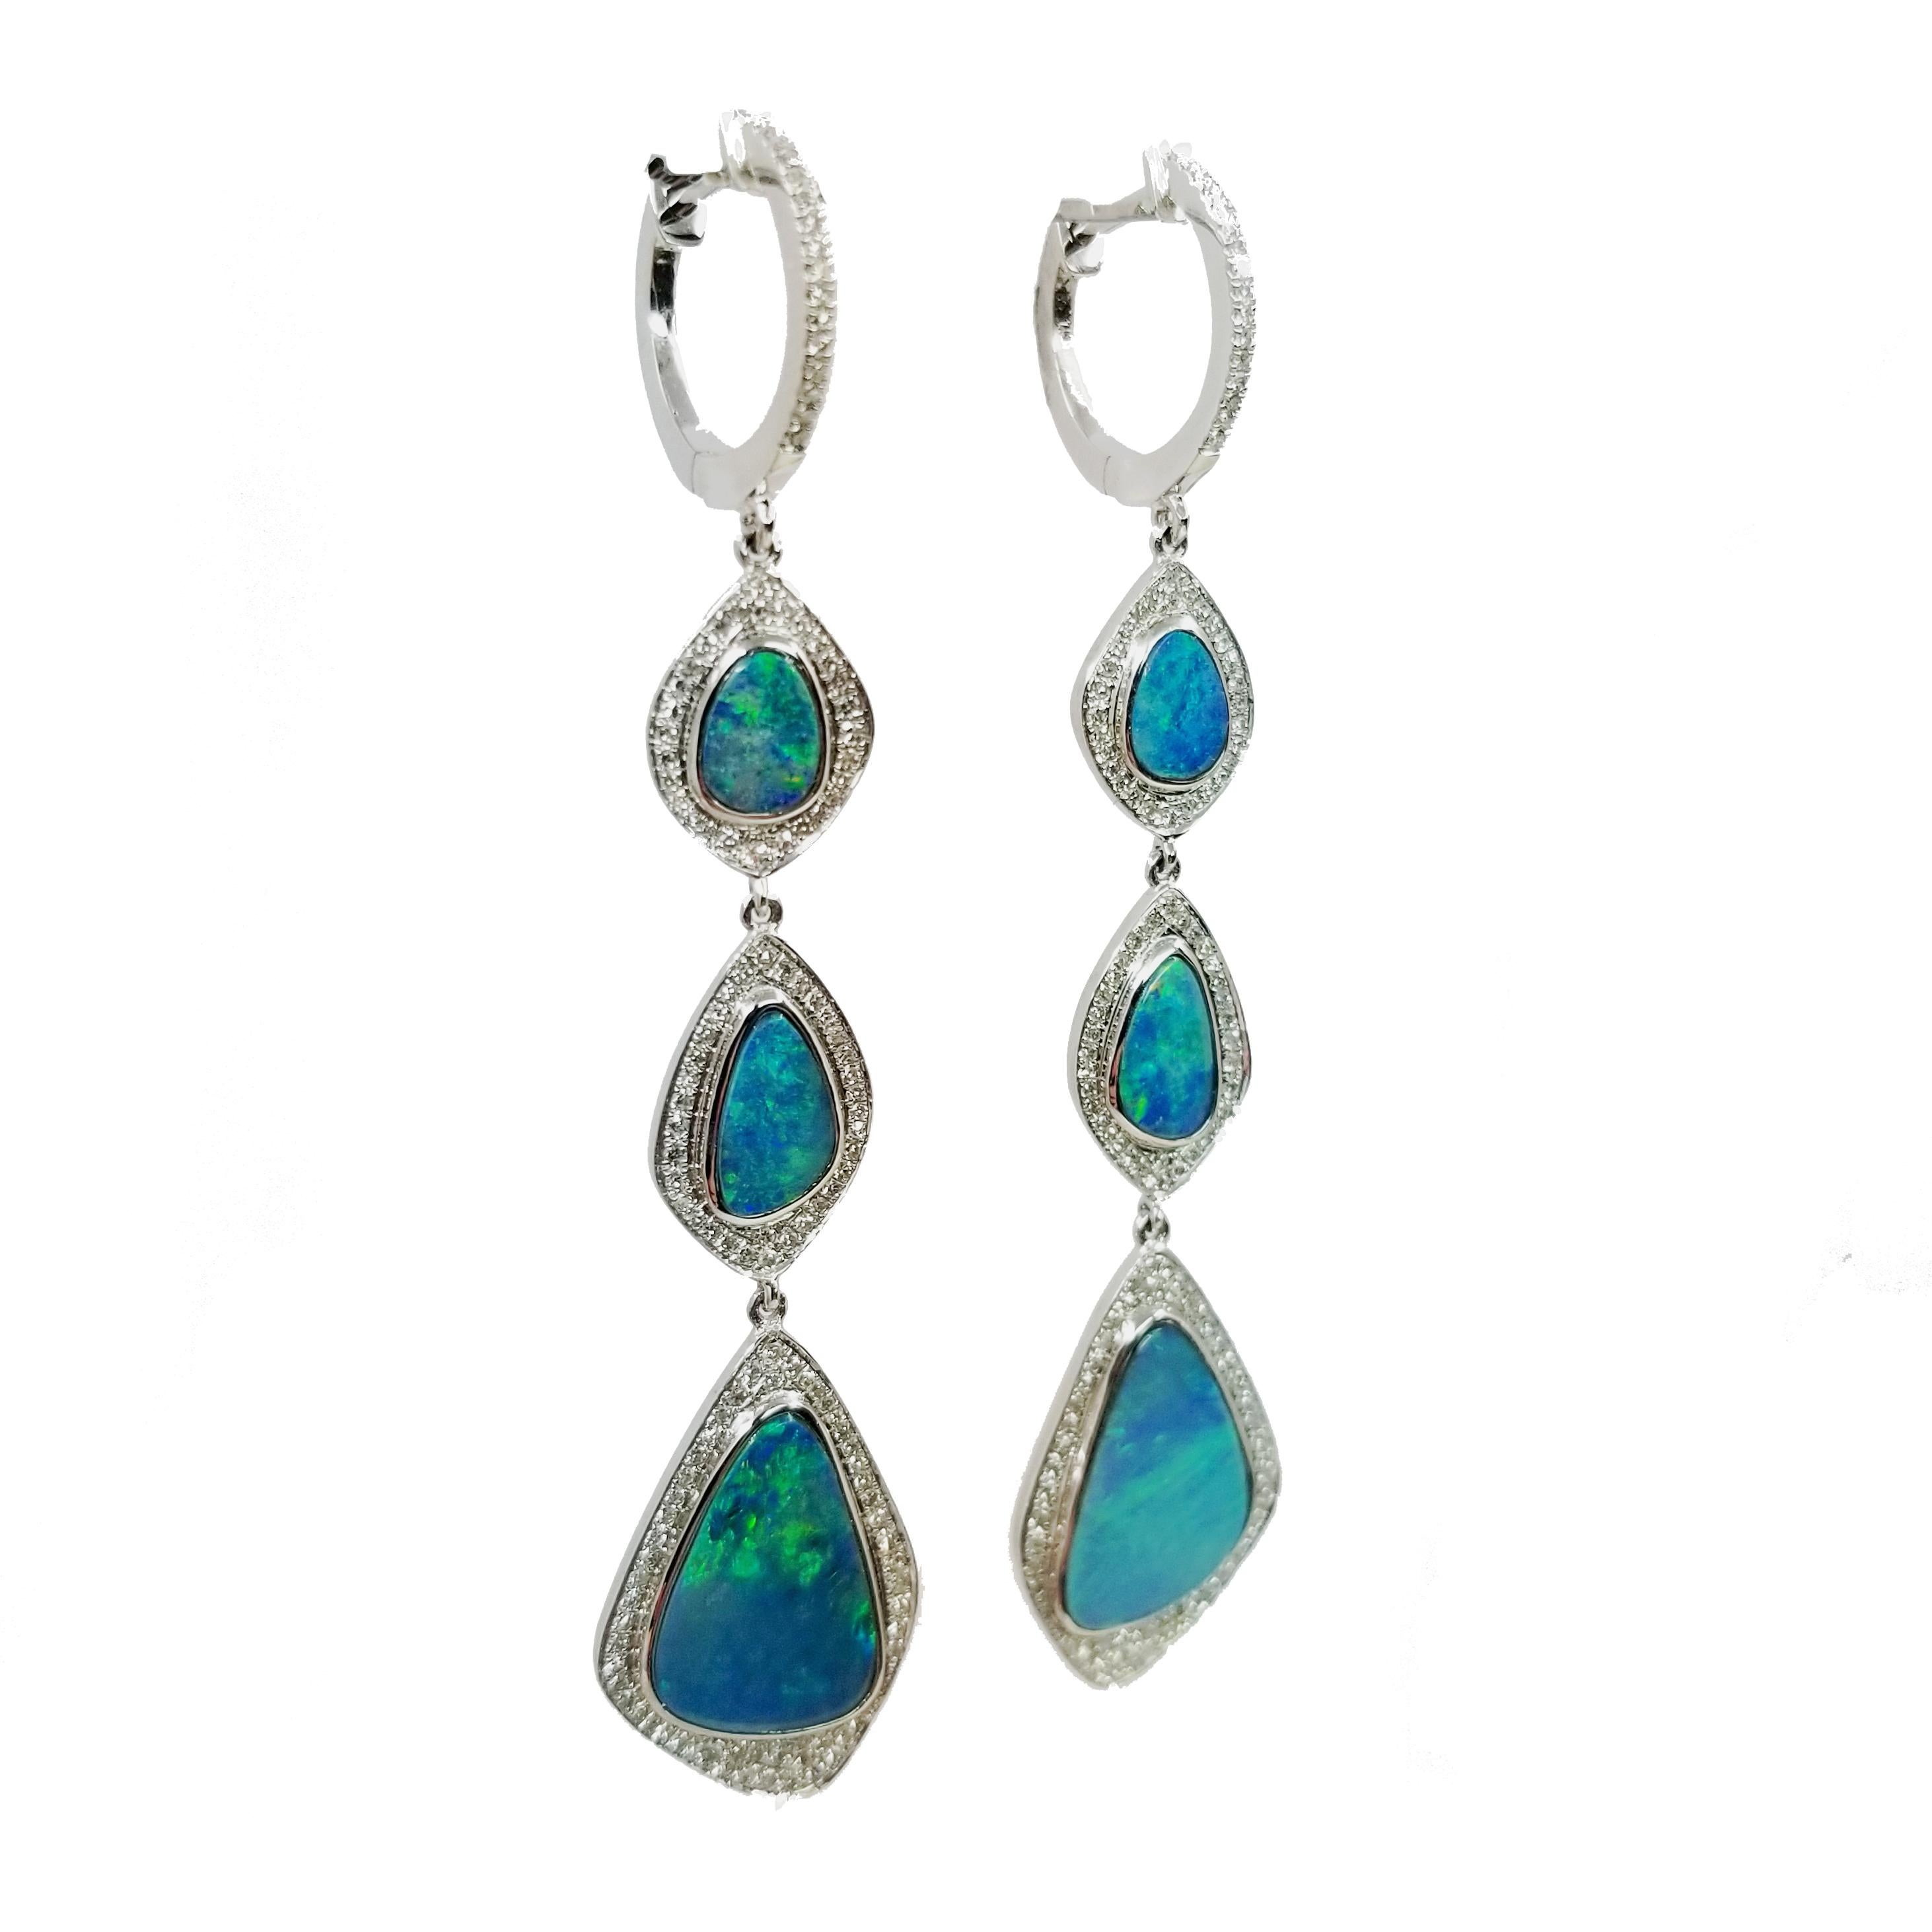 One of a kind opal earrings hand crafted in 14 karat white gold. The drop earrings feature 6 bezel-set opals totaling 3.96 Carats & 266 Round Diamonds totaling 0.64 Carats. The top is a mini hinged hoop attachment, with click closure. Total length